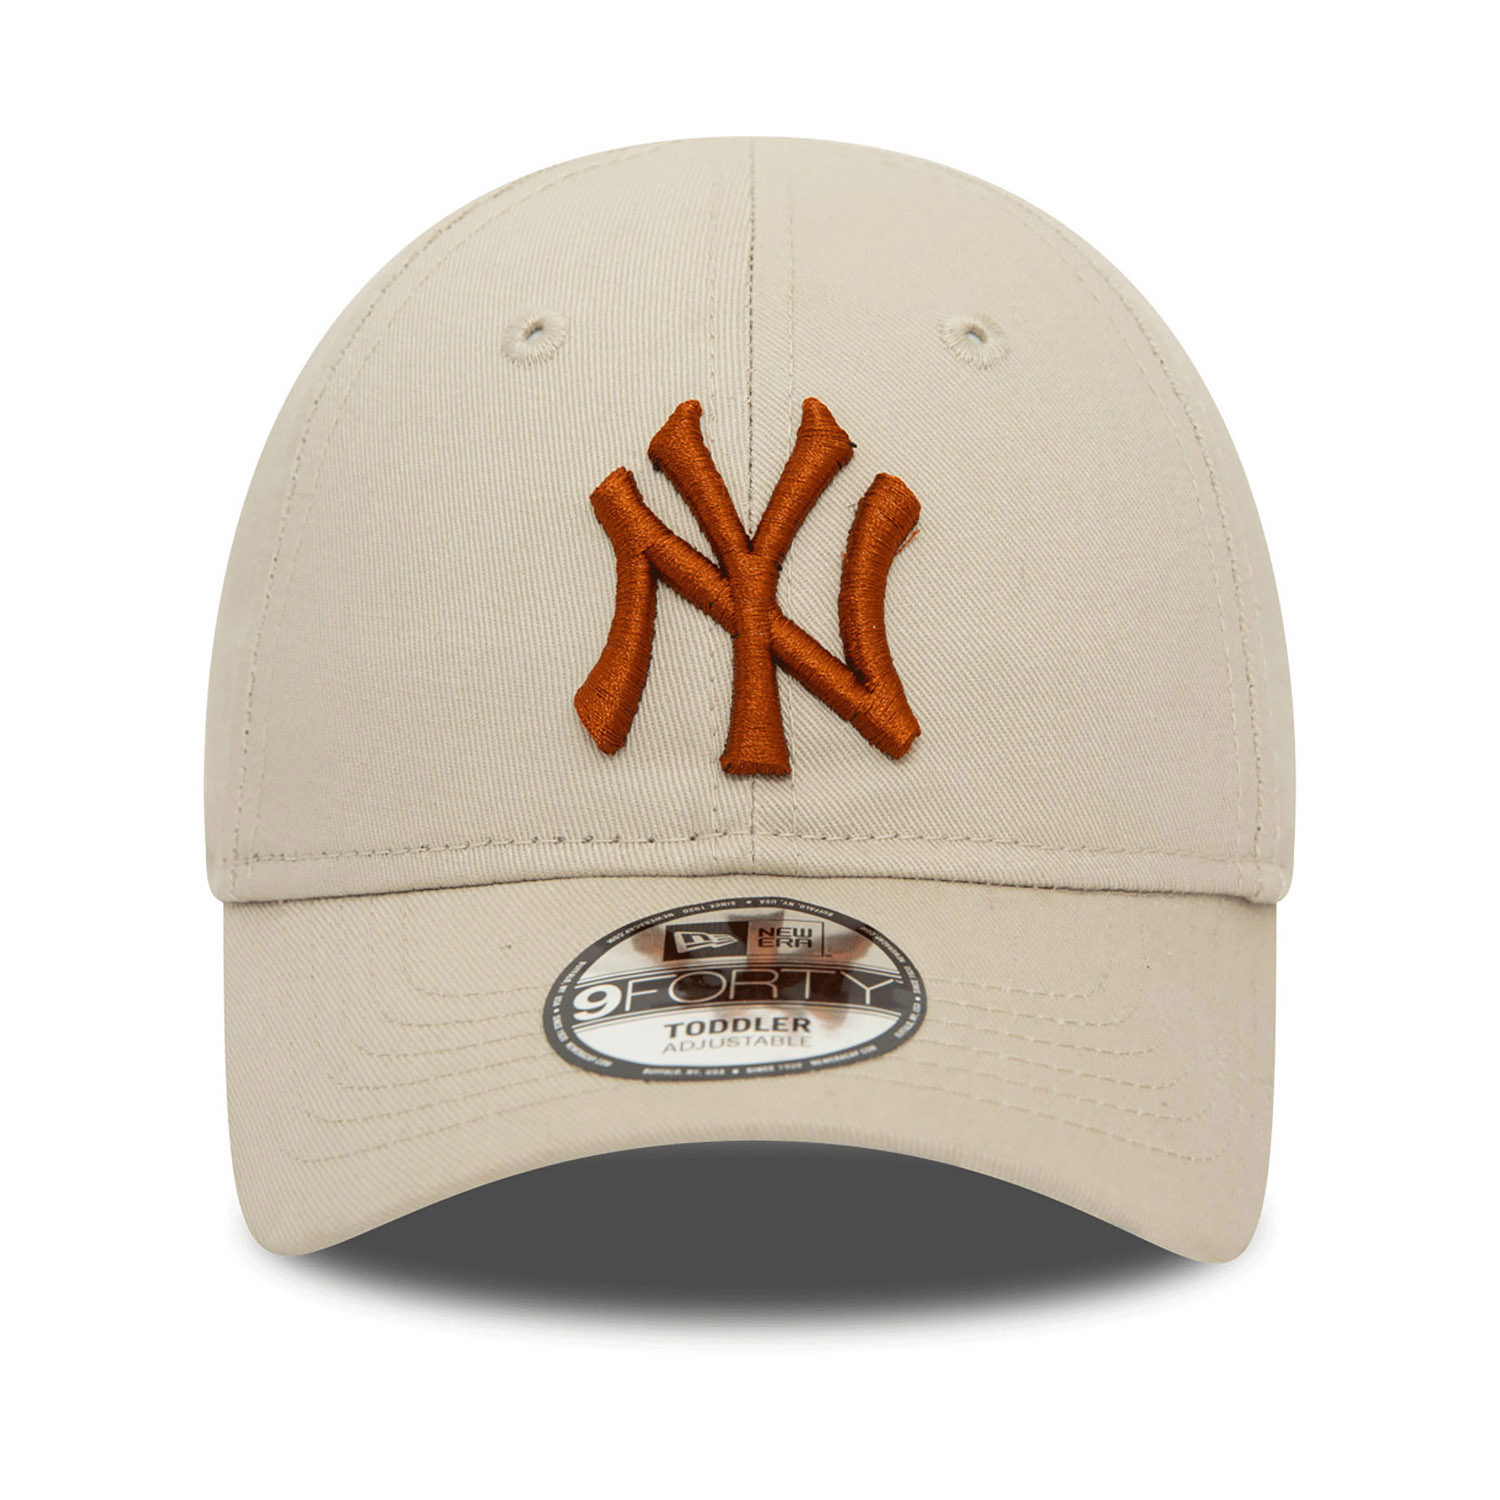 New York Yankees Toddler League Essential Stone 9FORTY Adjustable Cap